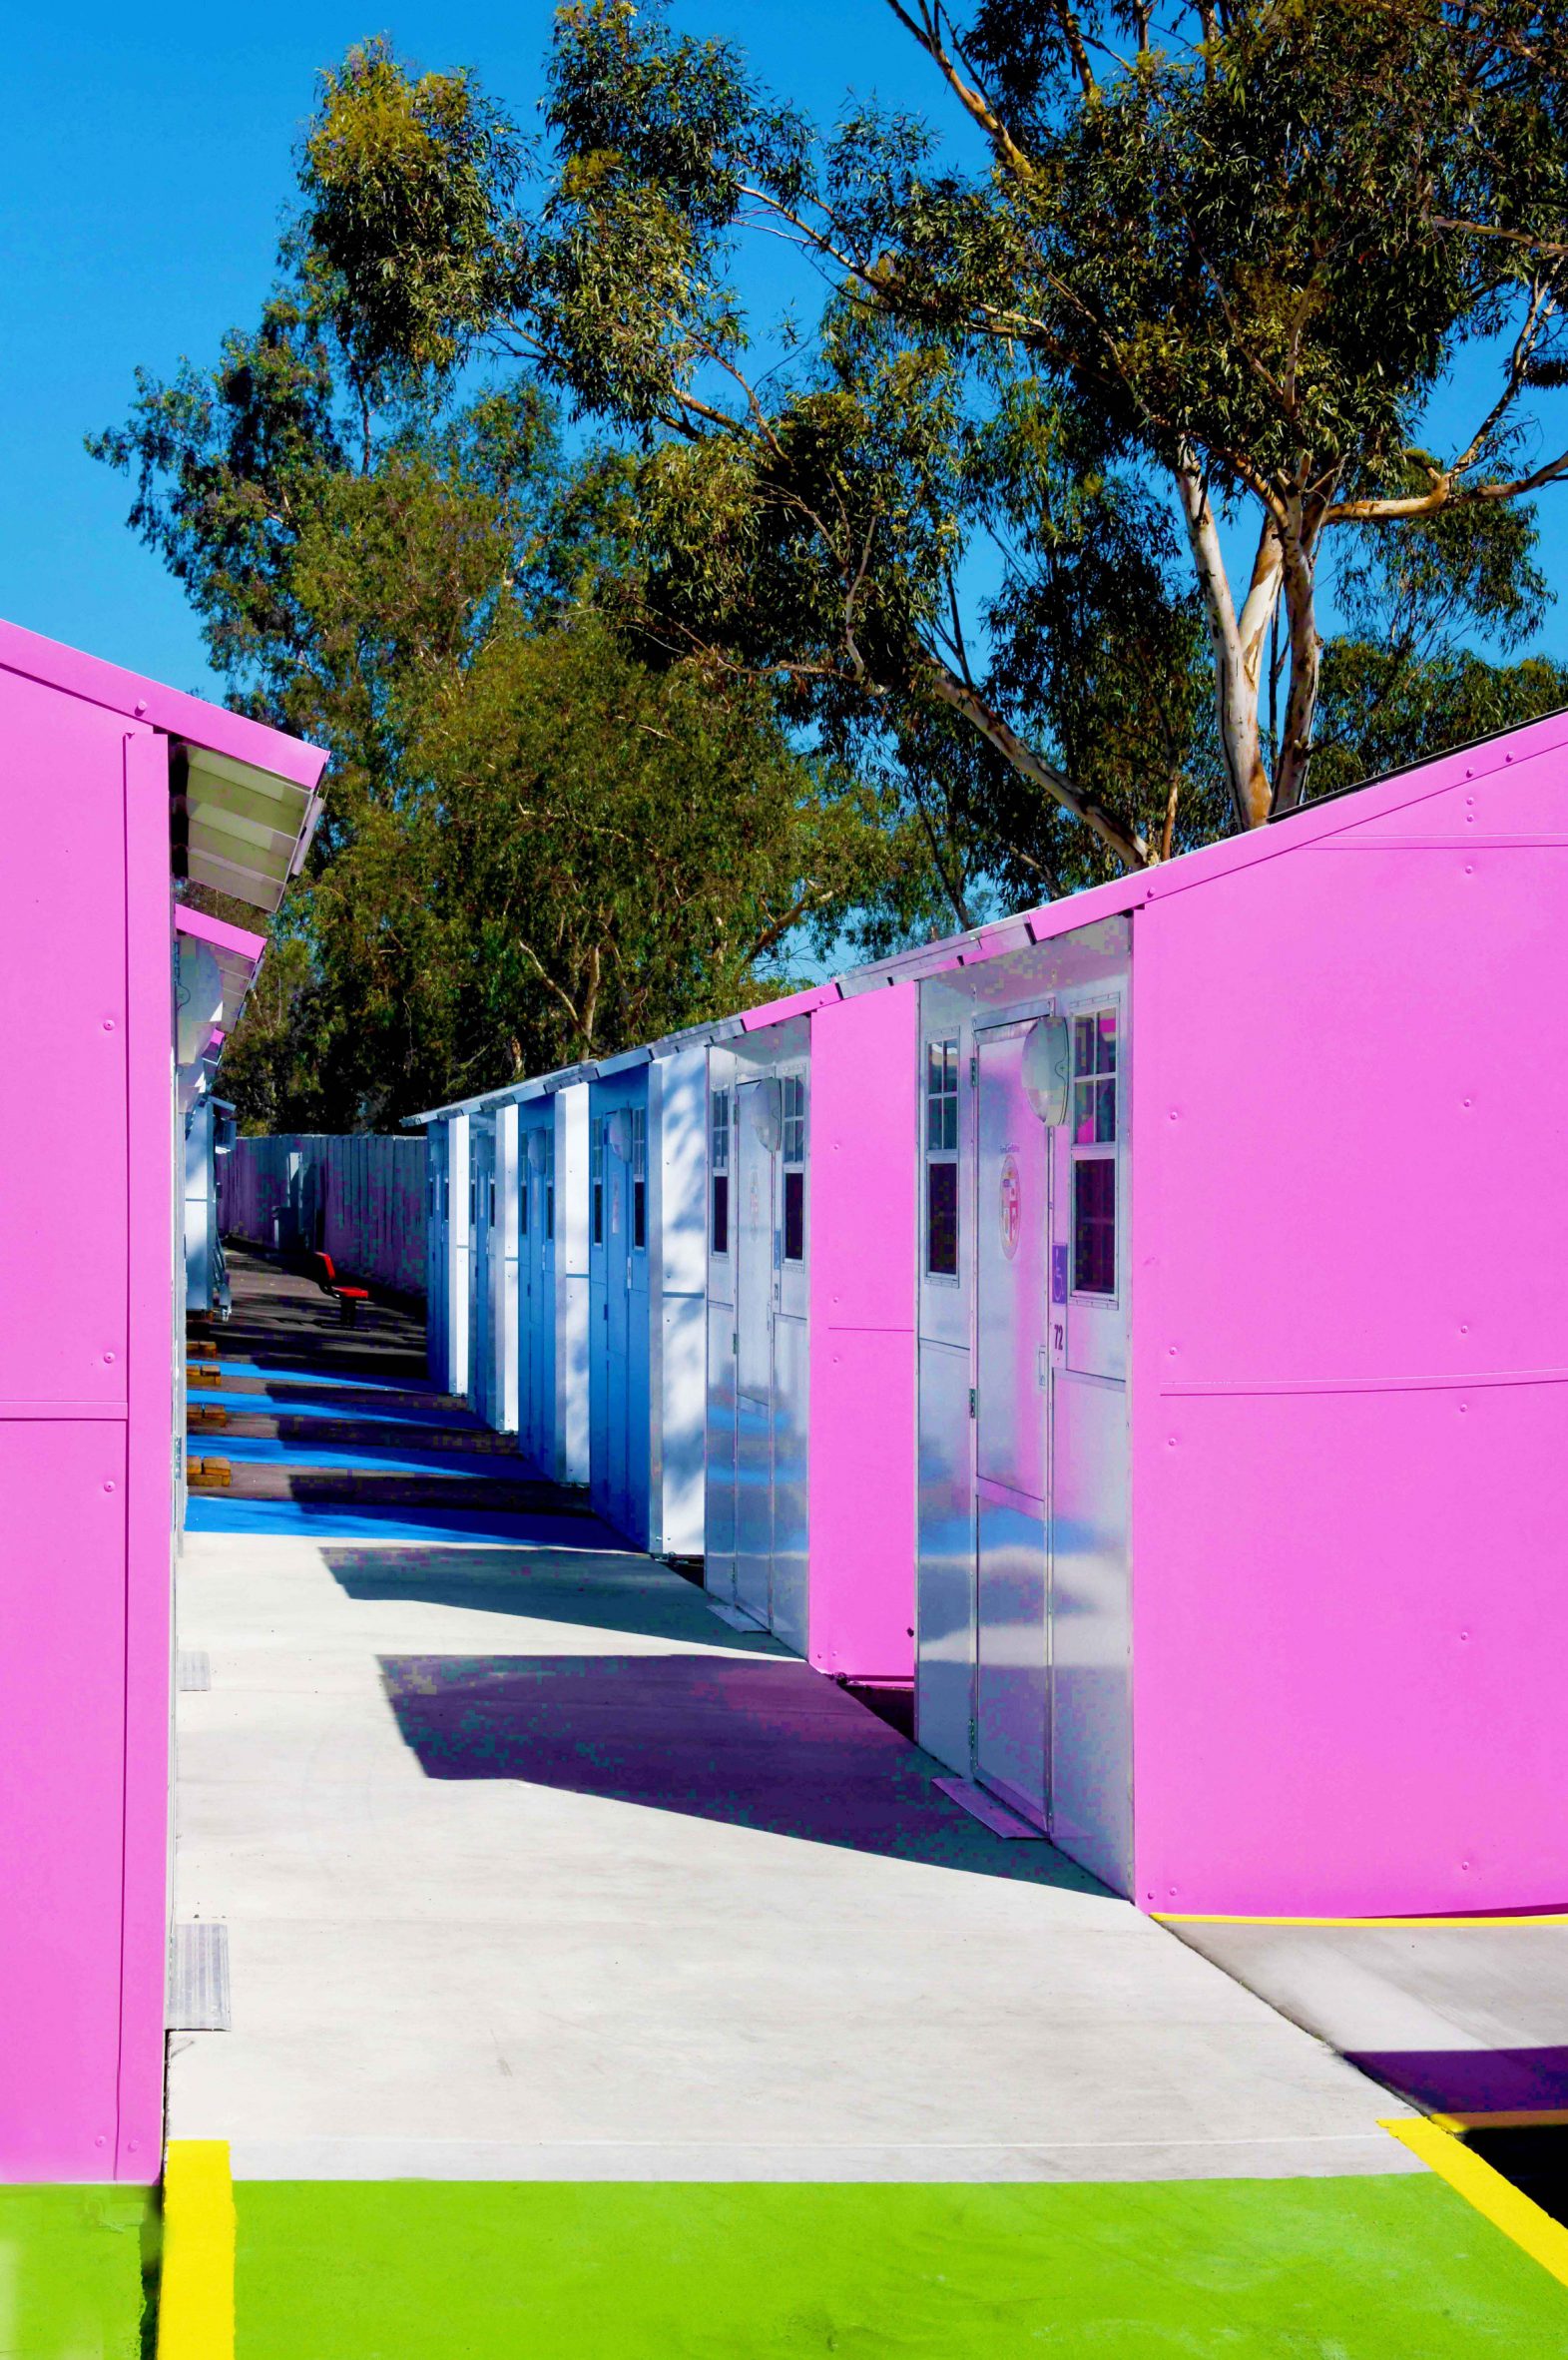 Pink-sided units at Whitsett West Tiny Home Village